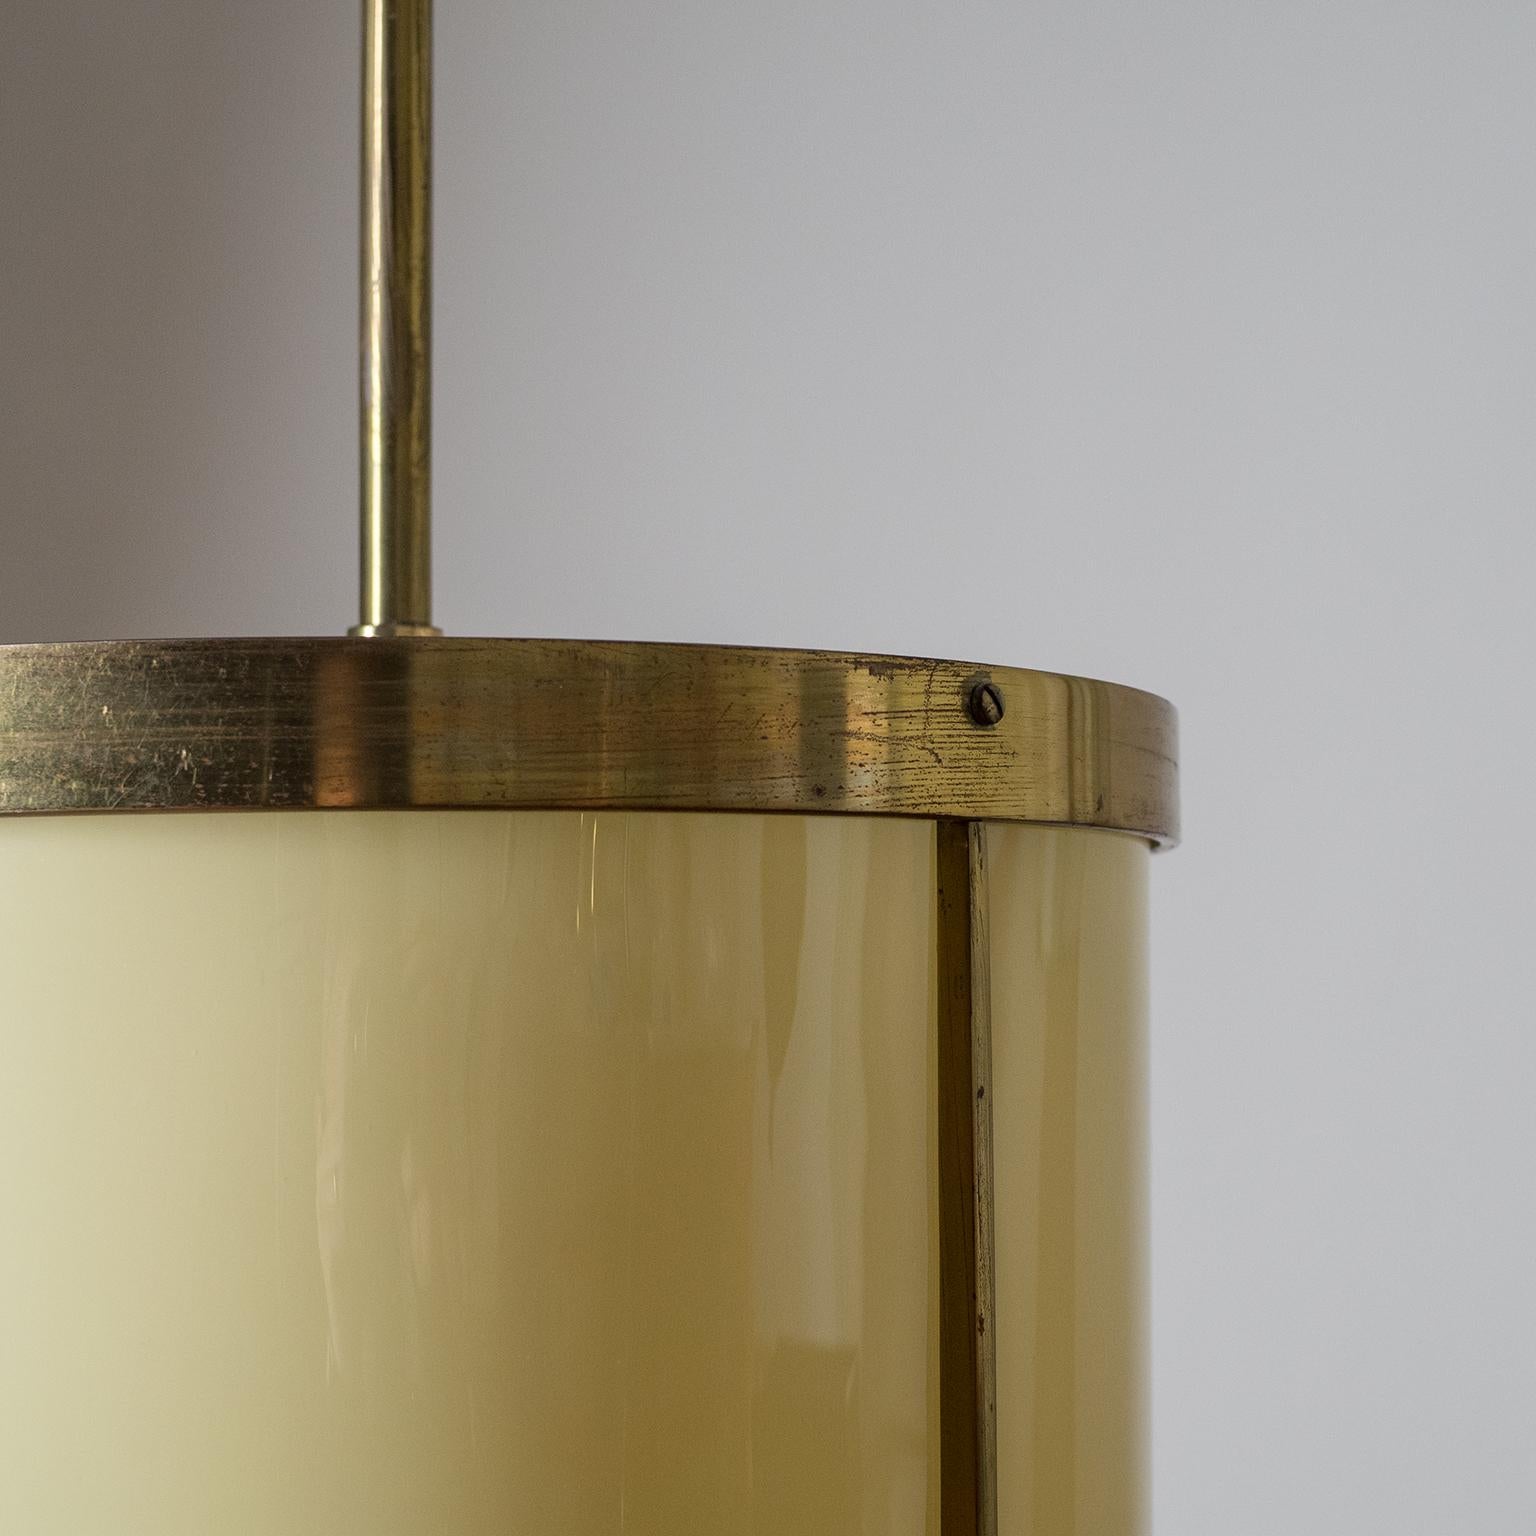 Oversize Drum Lantern, 1930s, Sand-Colored Glass and Brass In Good Condition For Sale In Vienna, AT